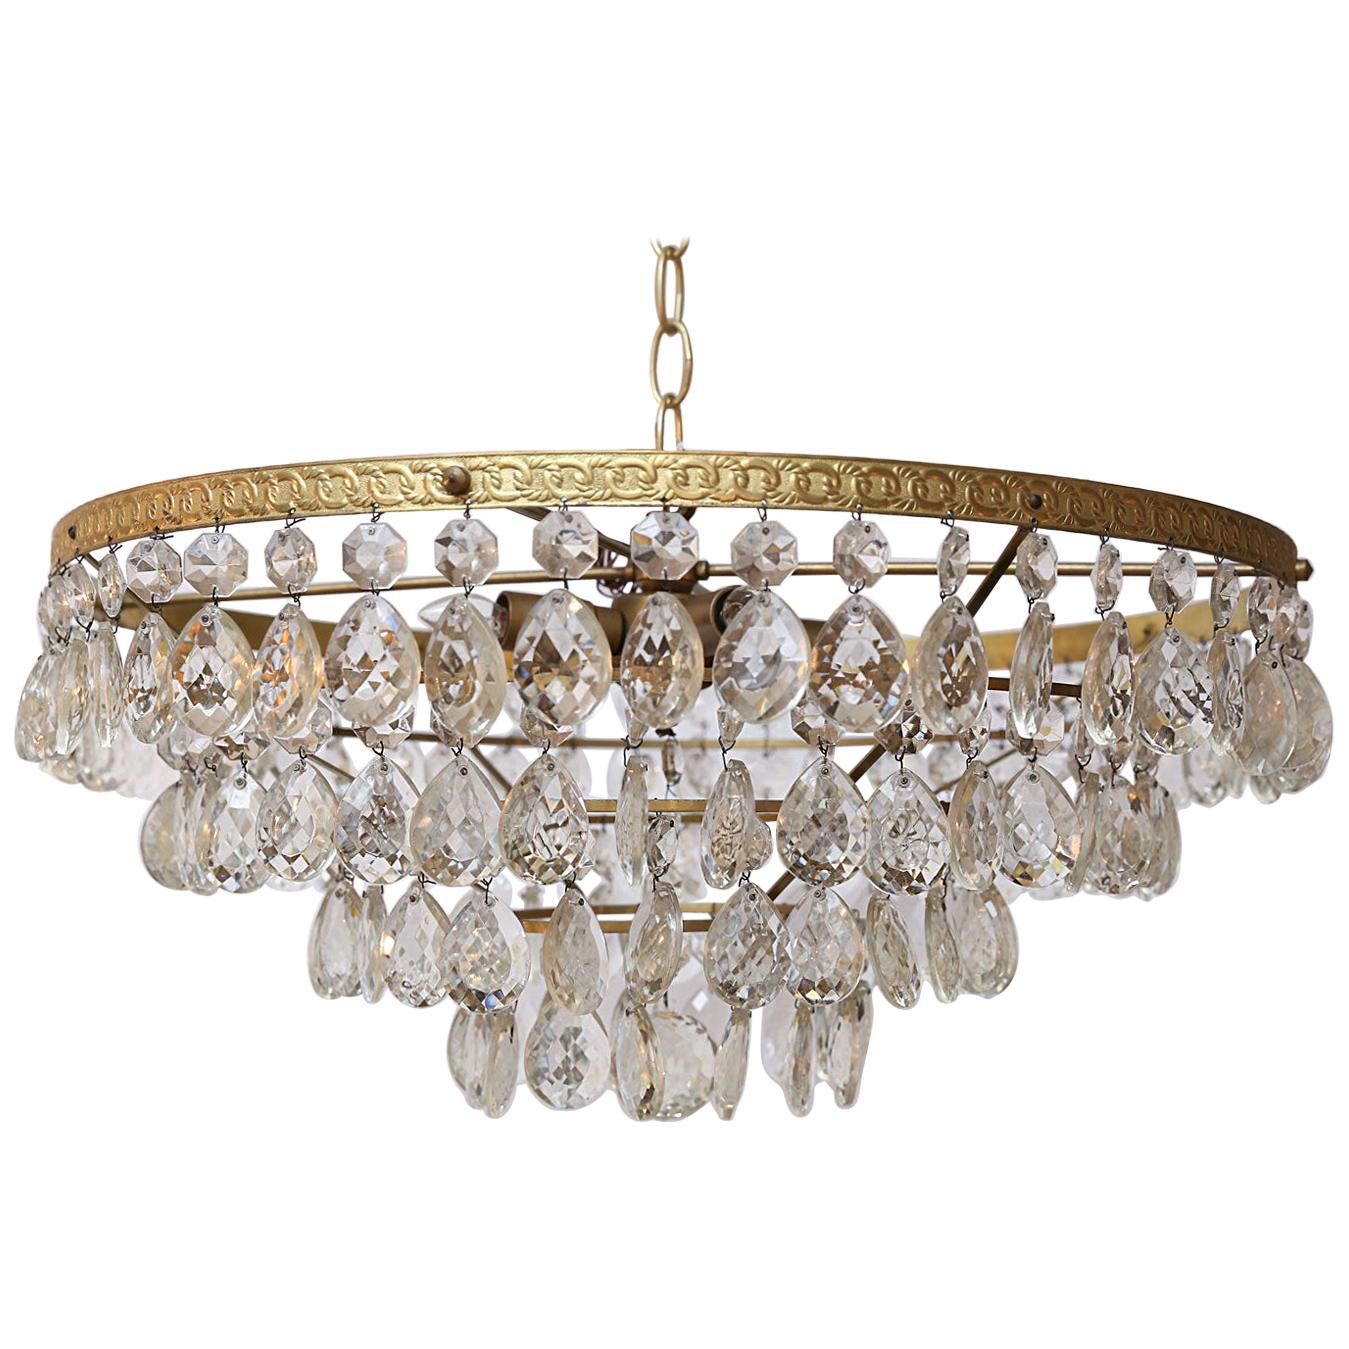 Gilt Brass and Crystal Mid century Modern Chandelier by Palwa with 4 Tiers